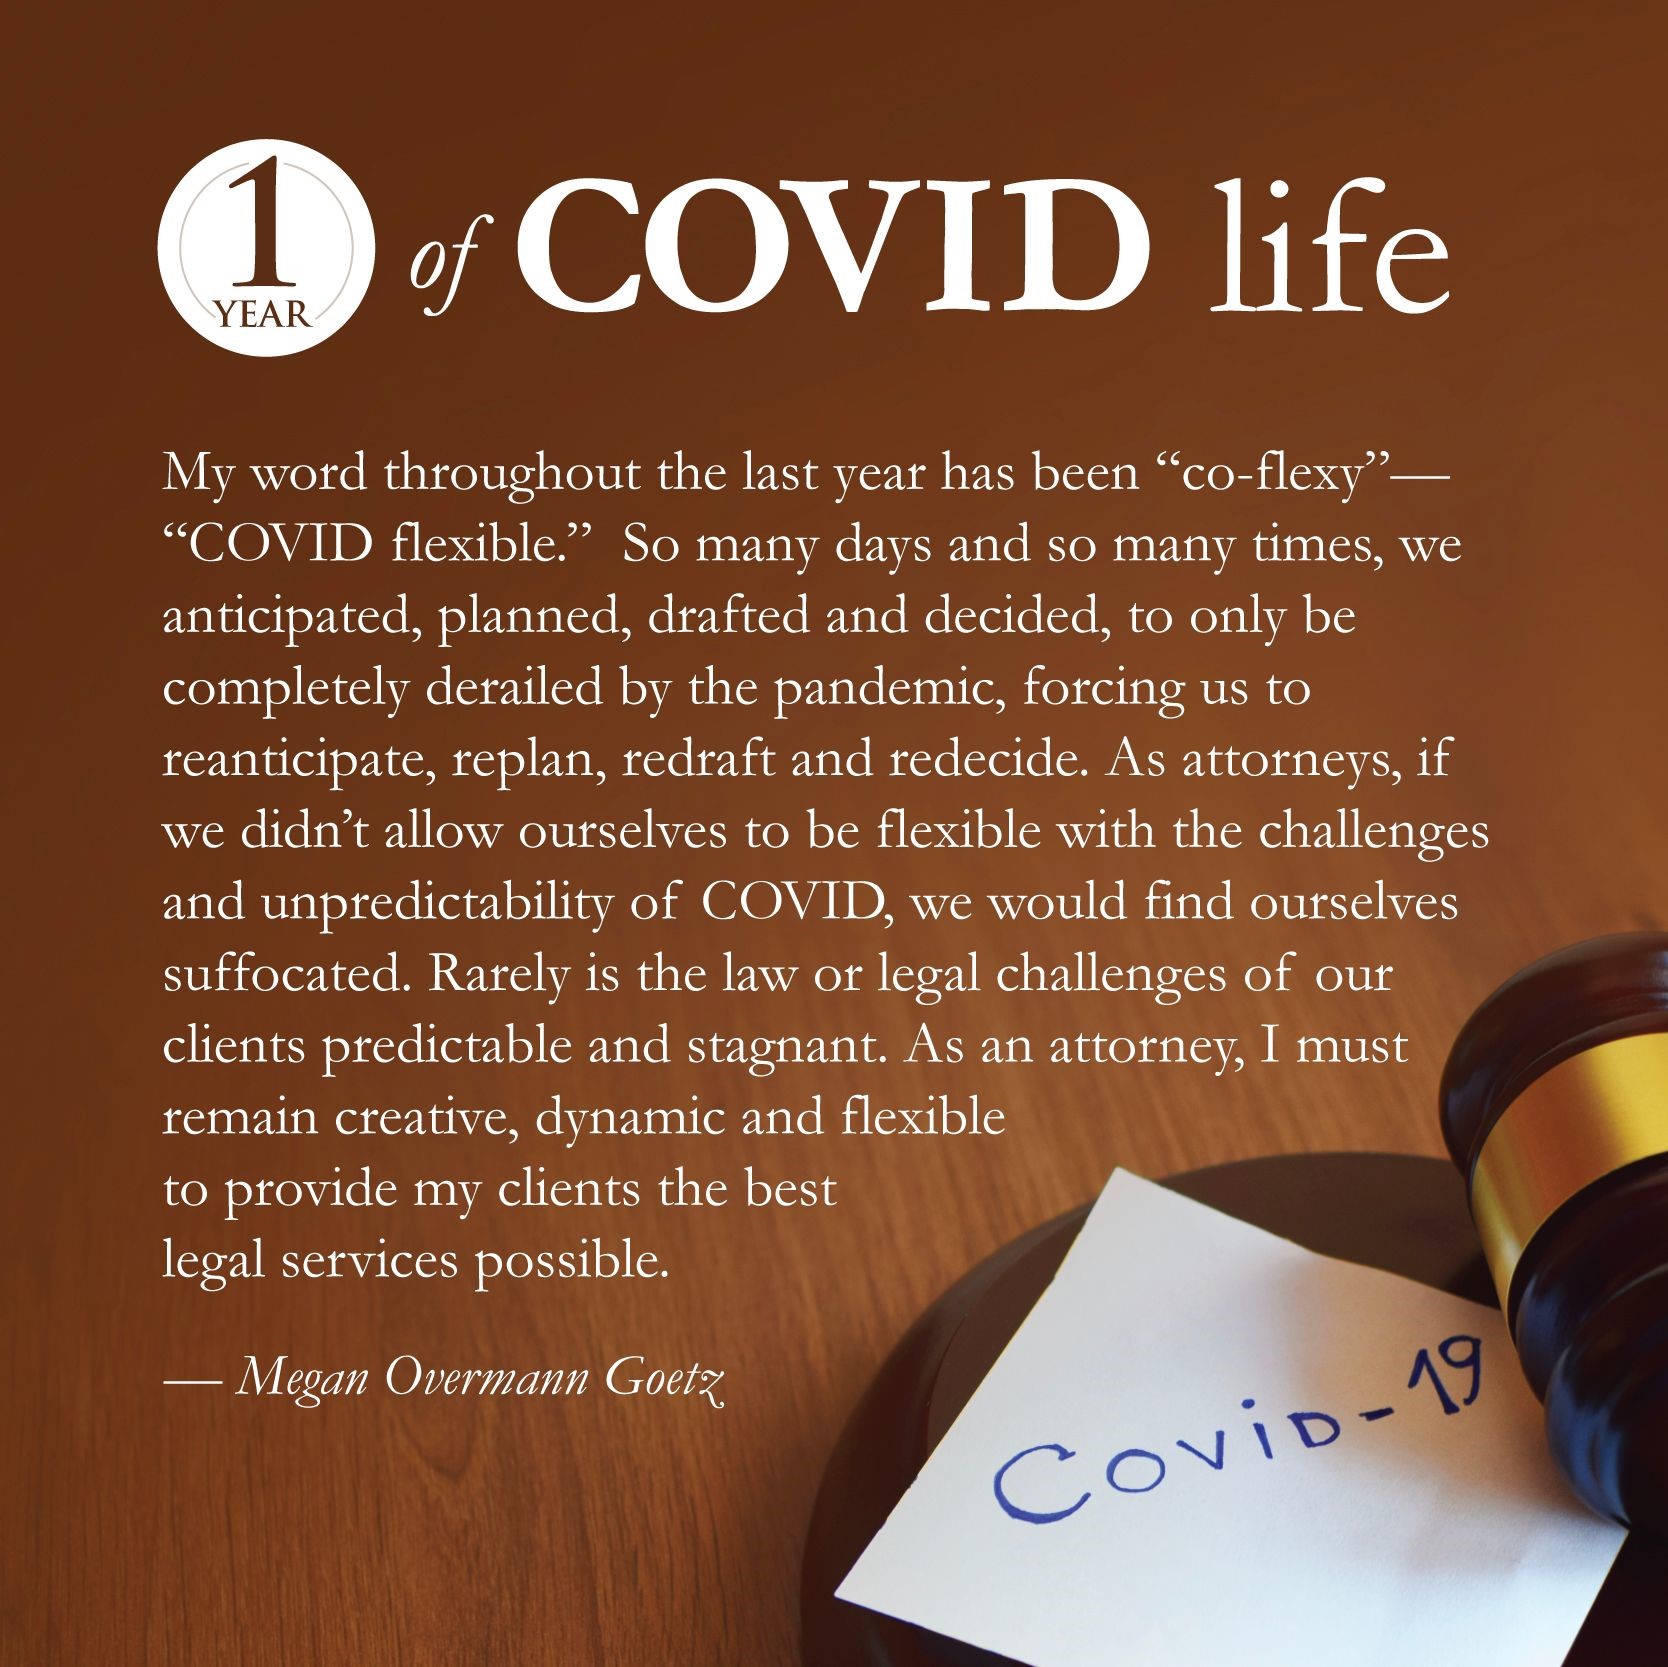 1 Year of Covid Life